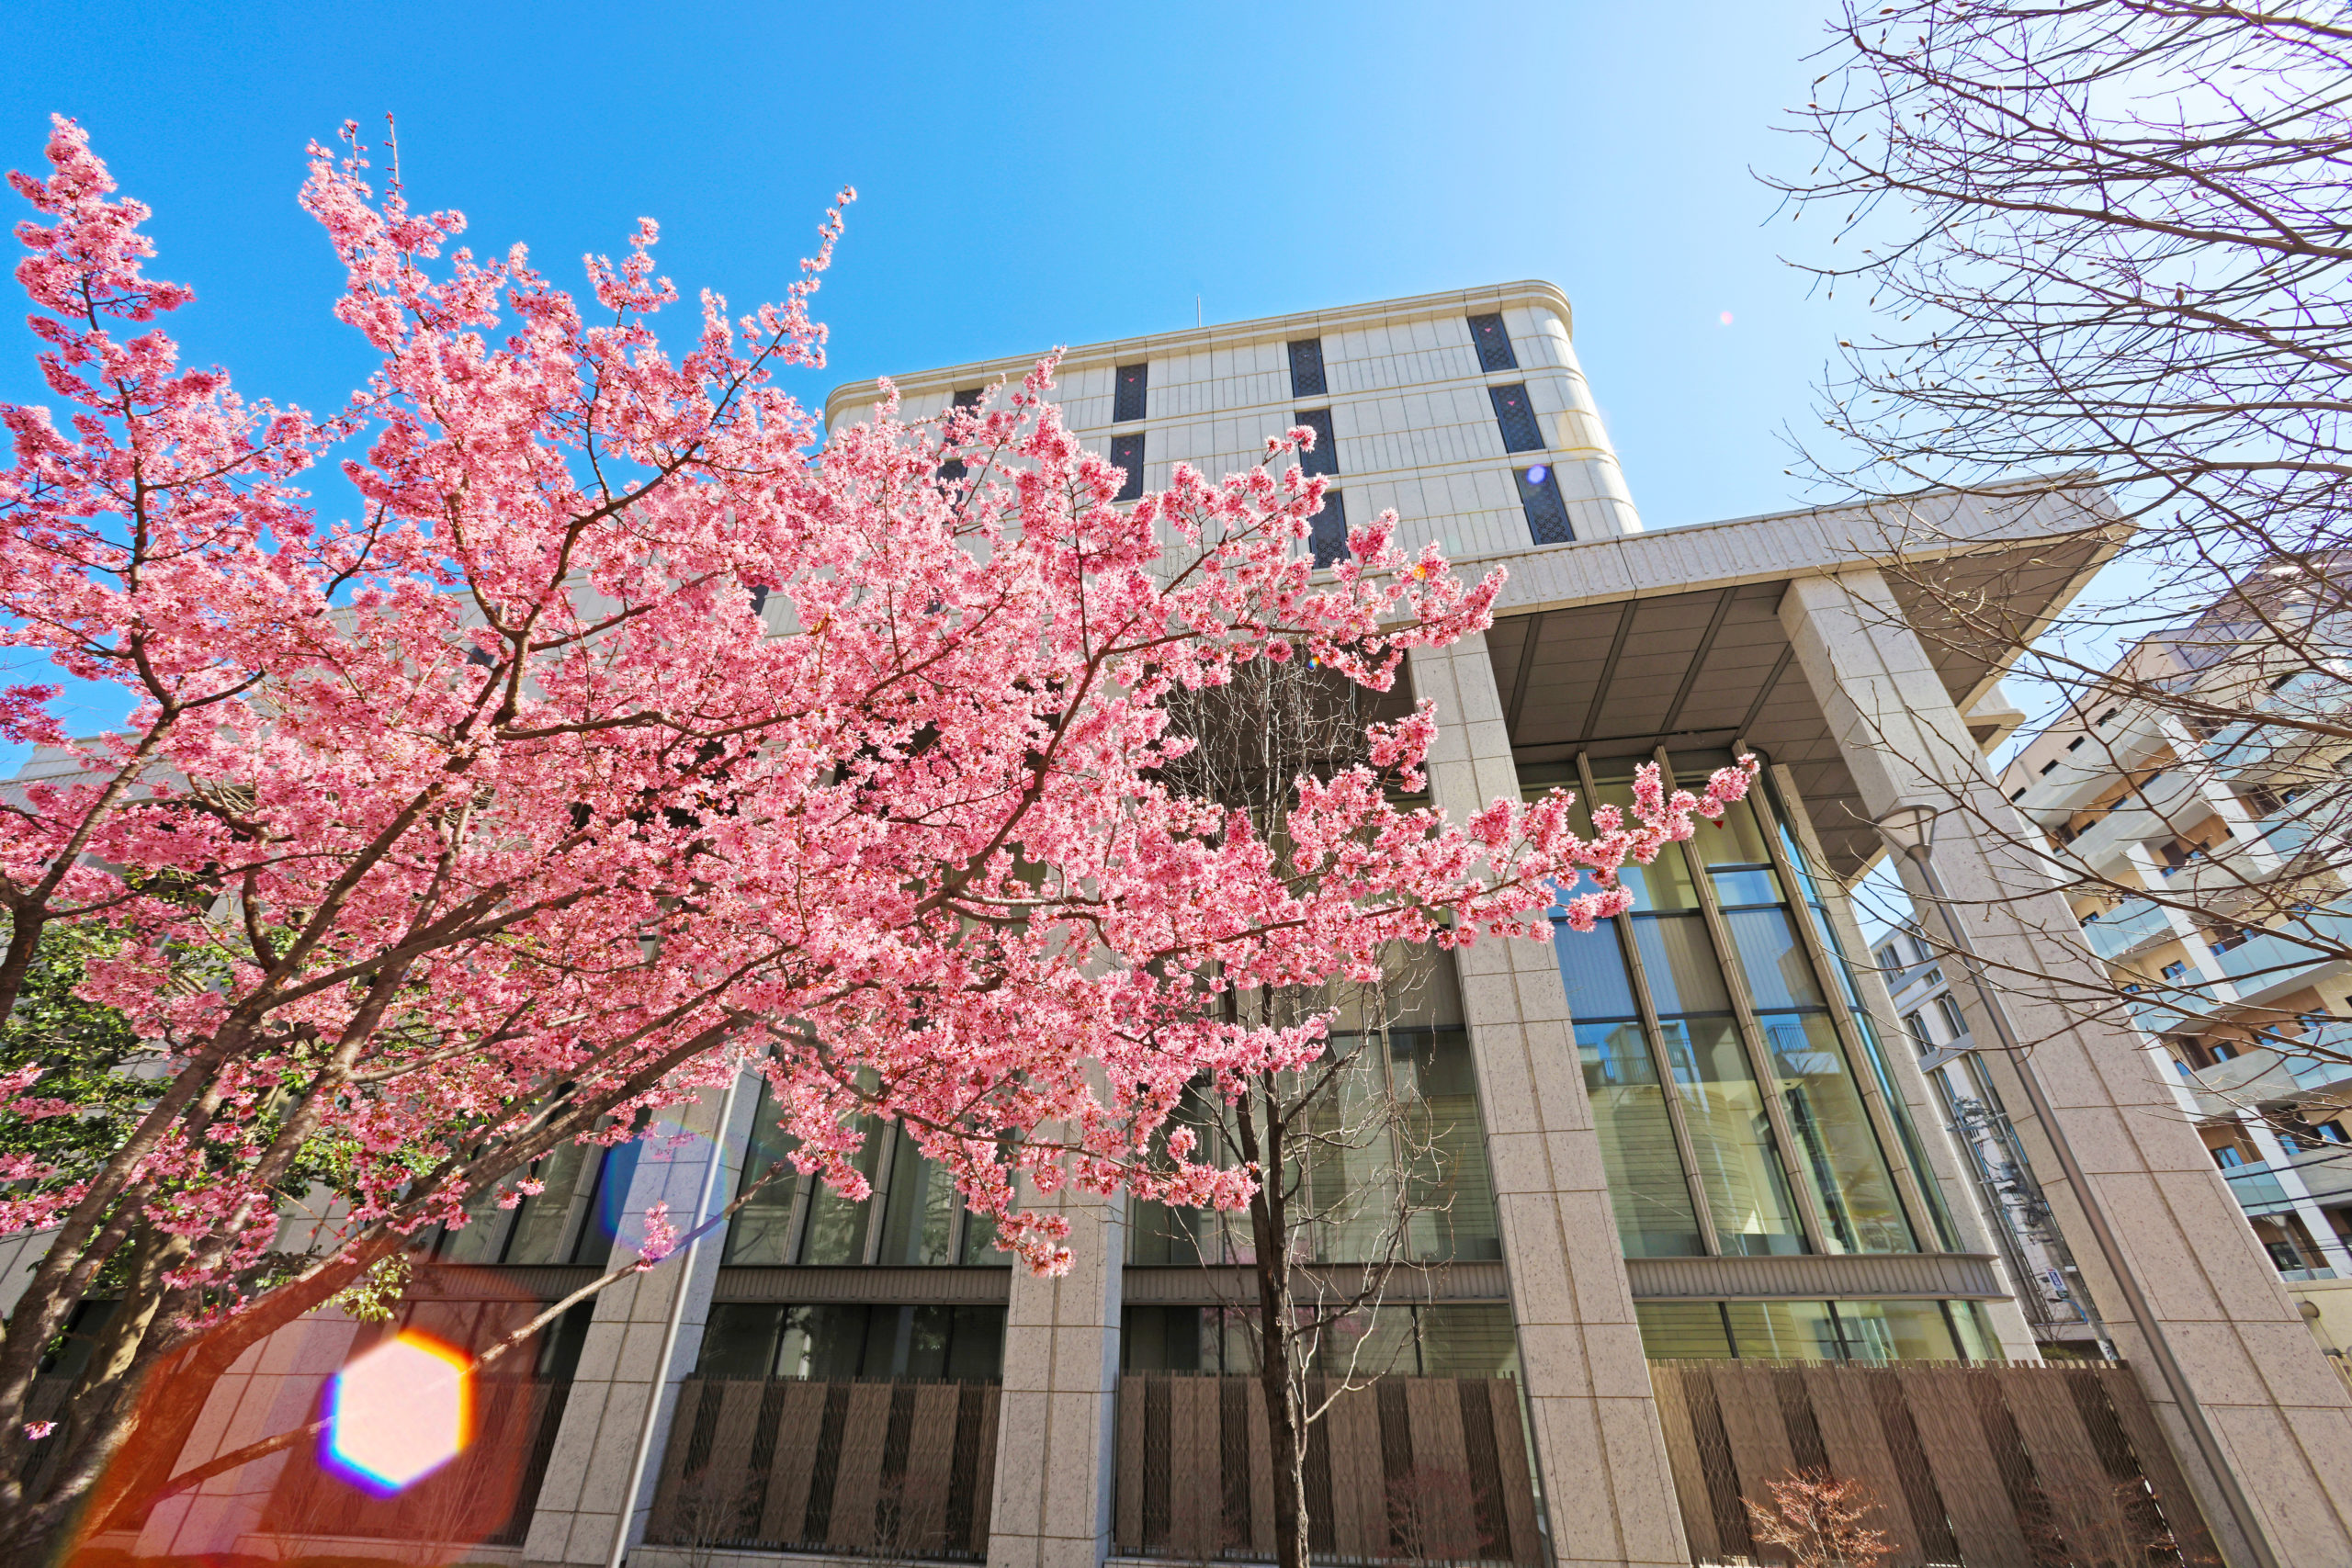 Pictured are early blooming cherry blossoms at the Soka Gakkai Headquarters complex, marking the arrival of spring. Photo by Seikyo Press